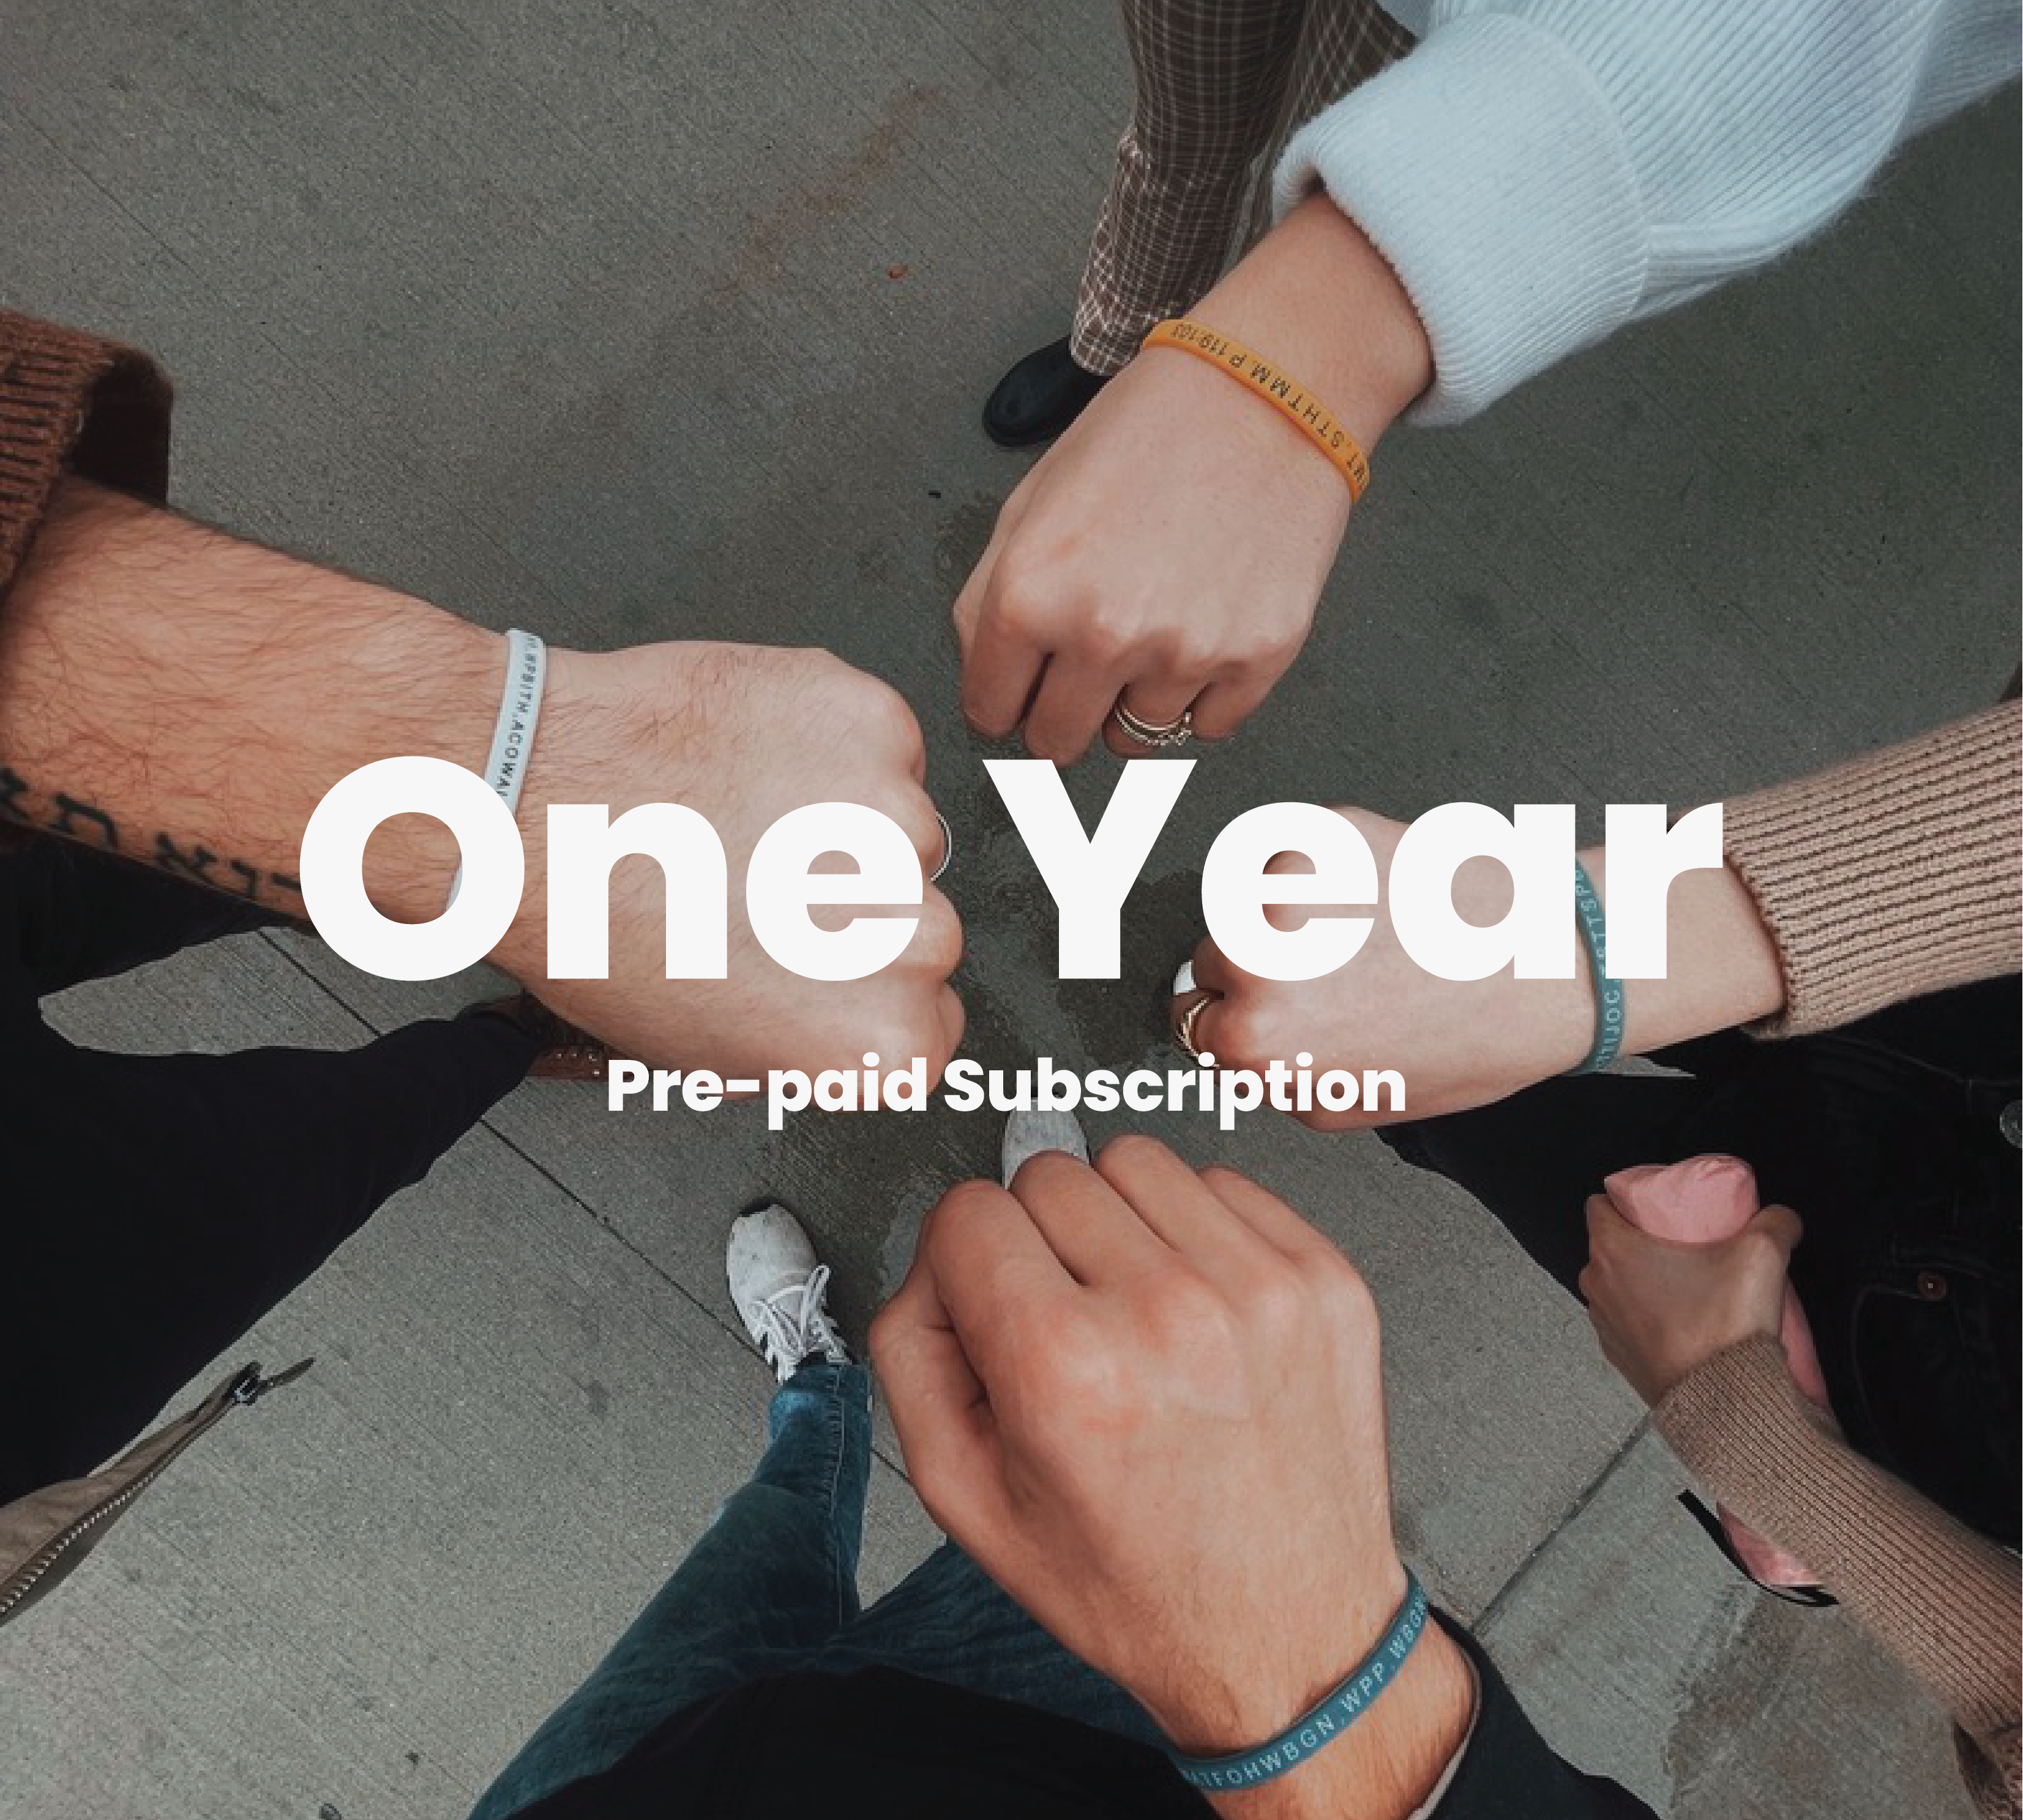 1 YEAR SUBSCRIPTION (Pre-paid)